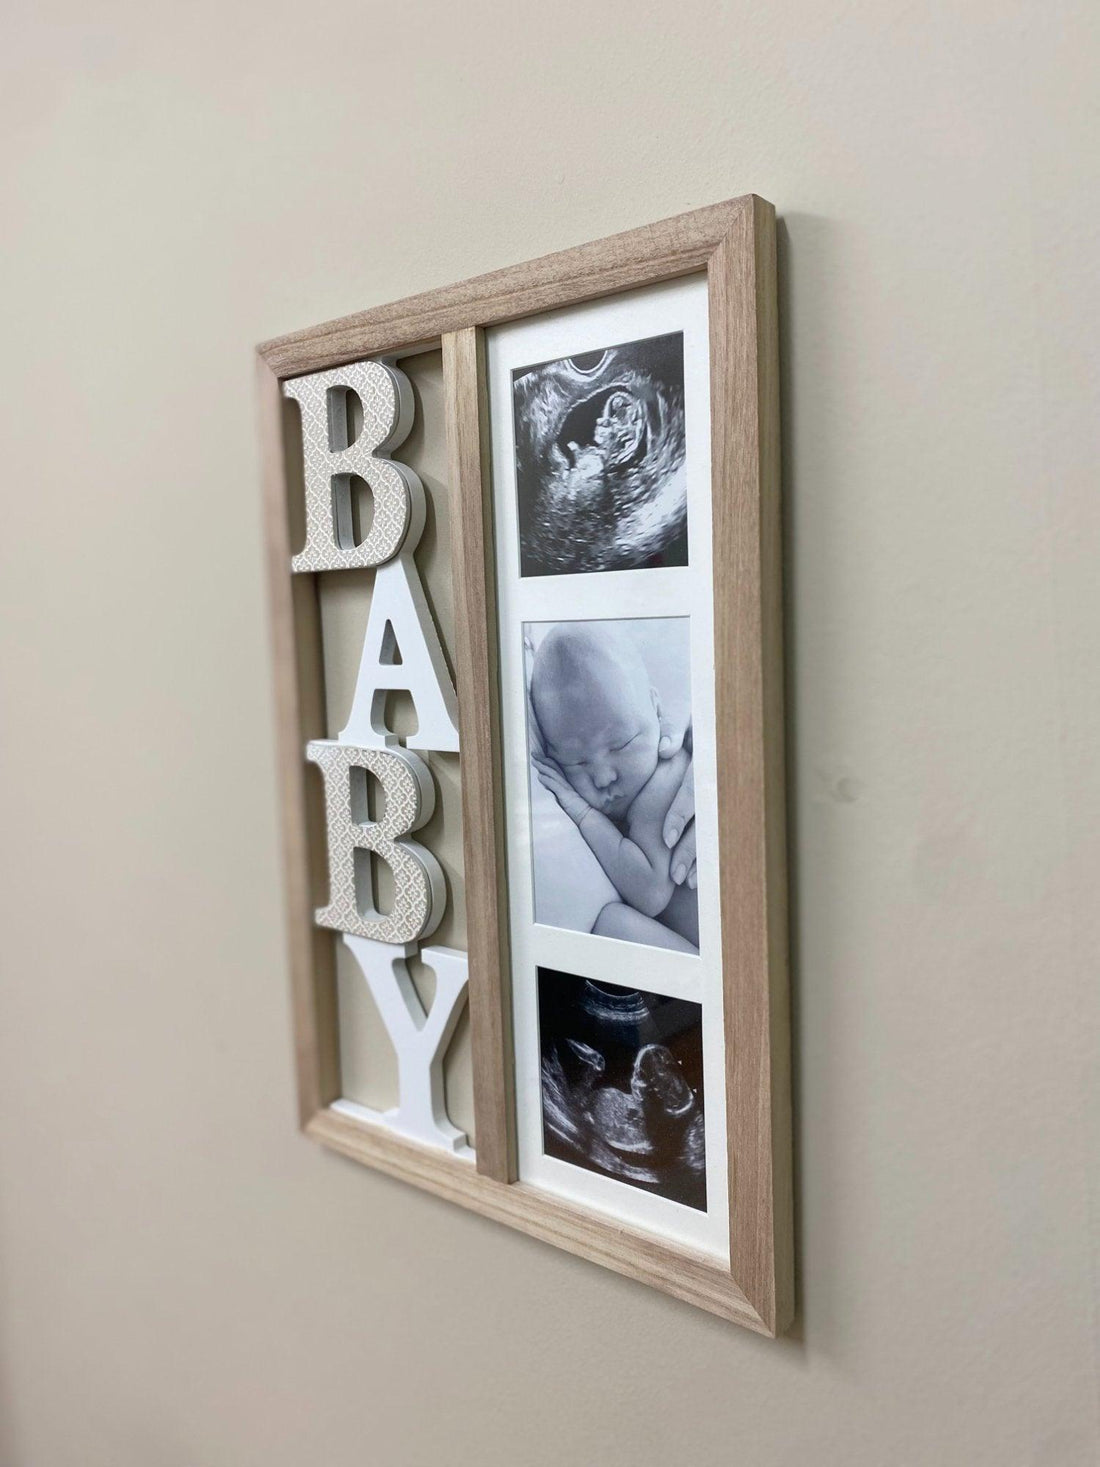 Baby Three Photograph Wooden Frame 43cm - £33.99 - New Baby 